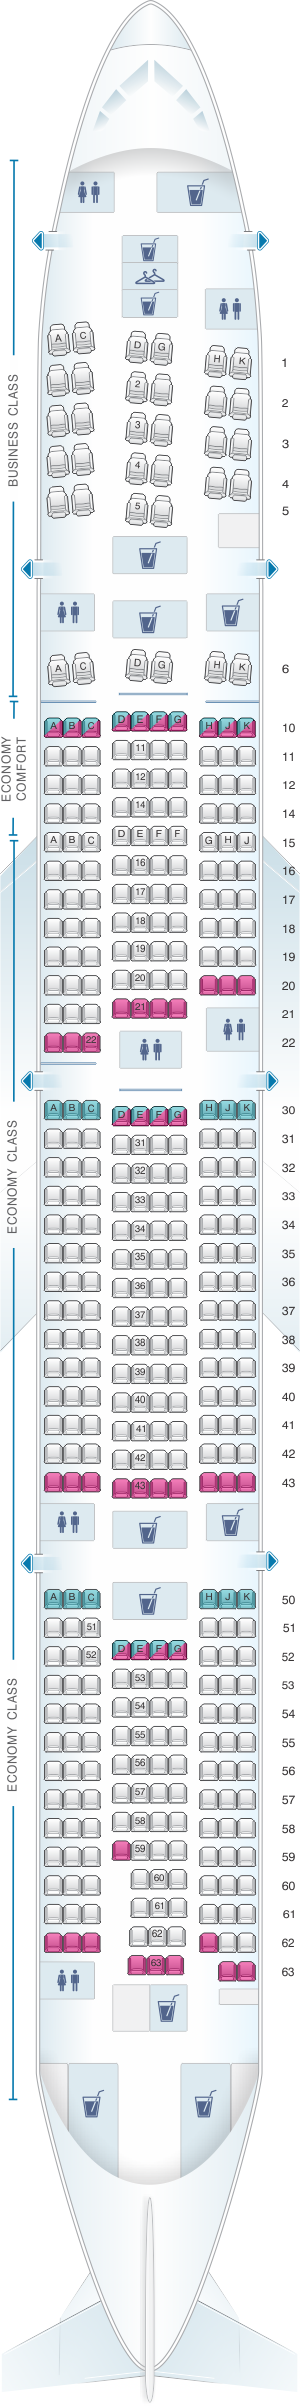 Boeing 777 Wide Body Jet Seating Chart